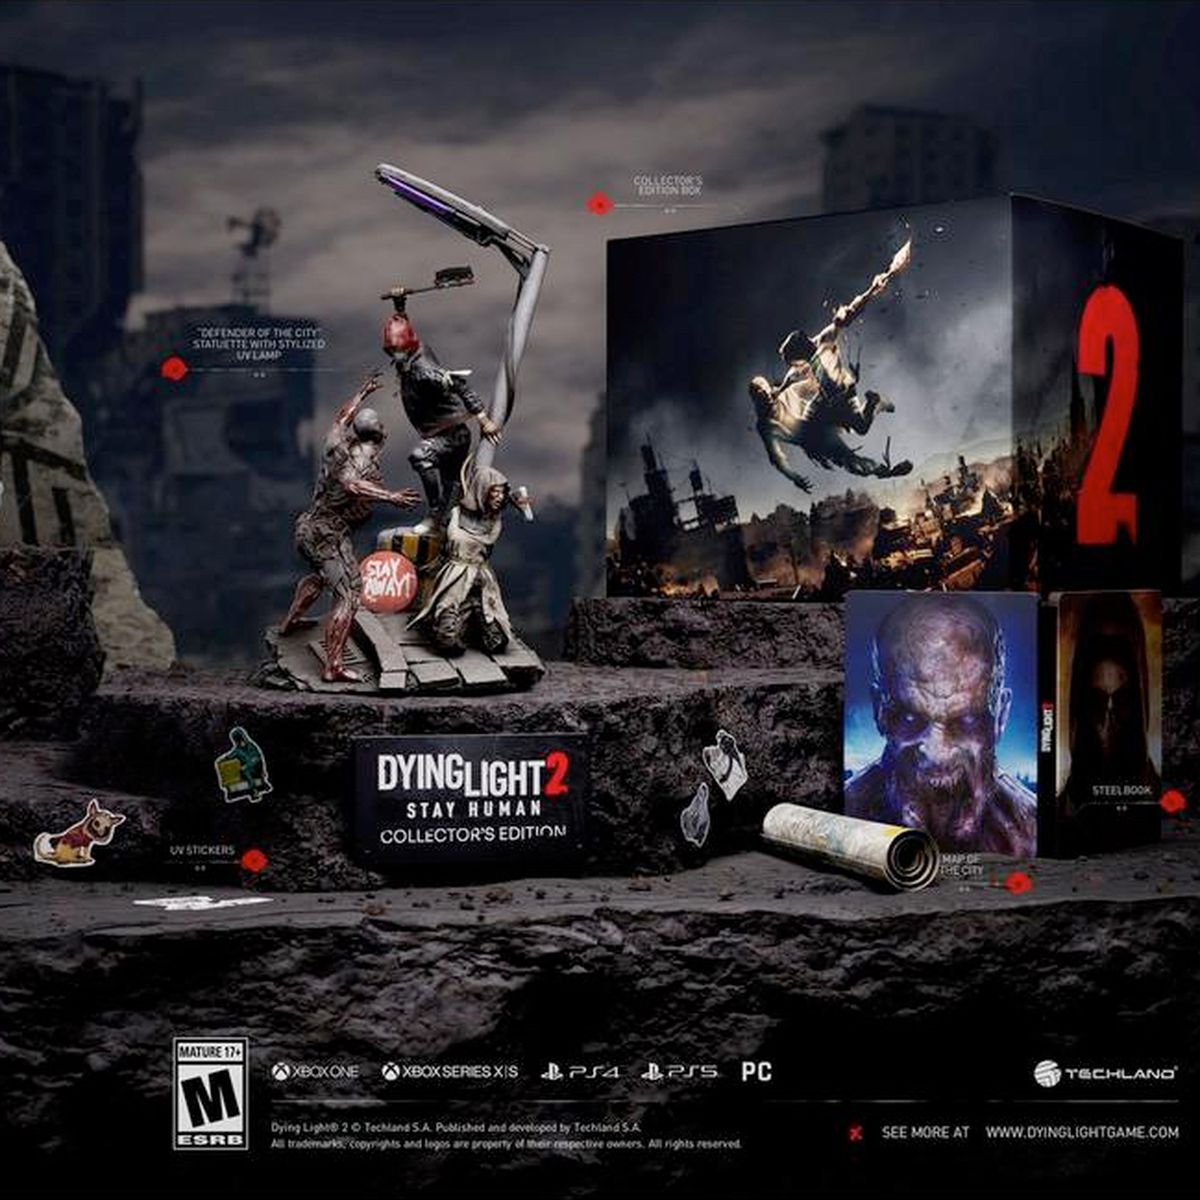 Dying Light 2 Collector’s Edition pre-order